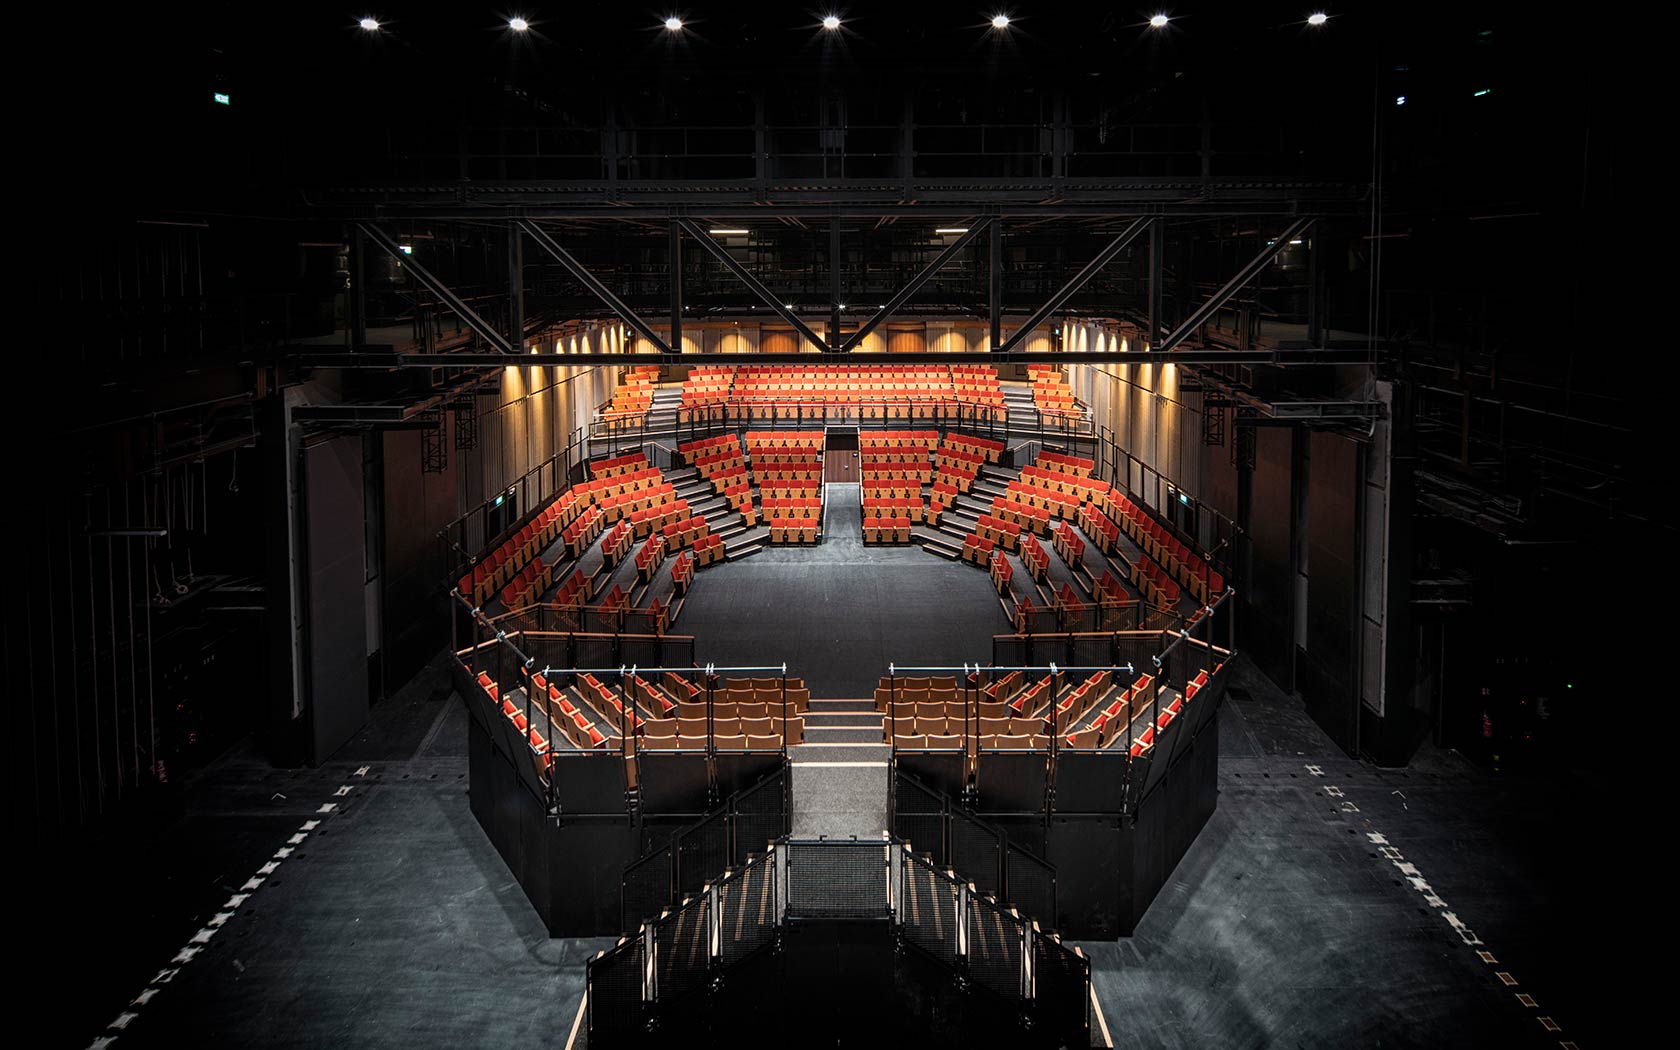 Image of the interior of the Singtel Waterfront Theatre with seats configured in the round.